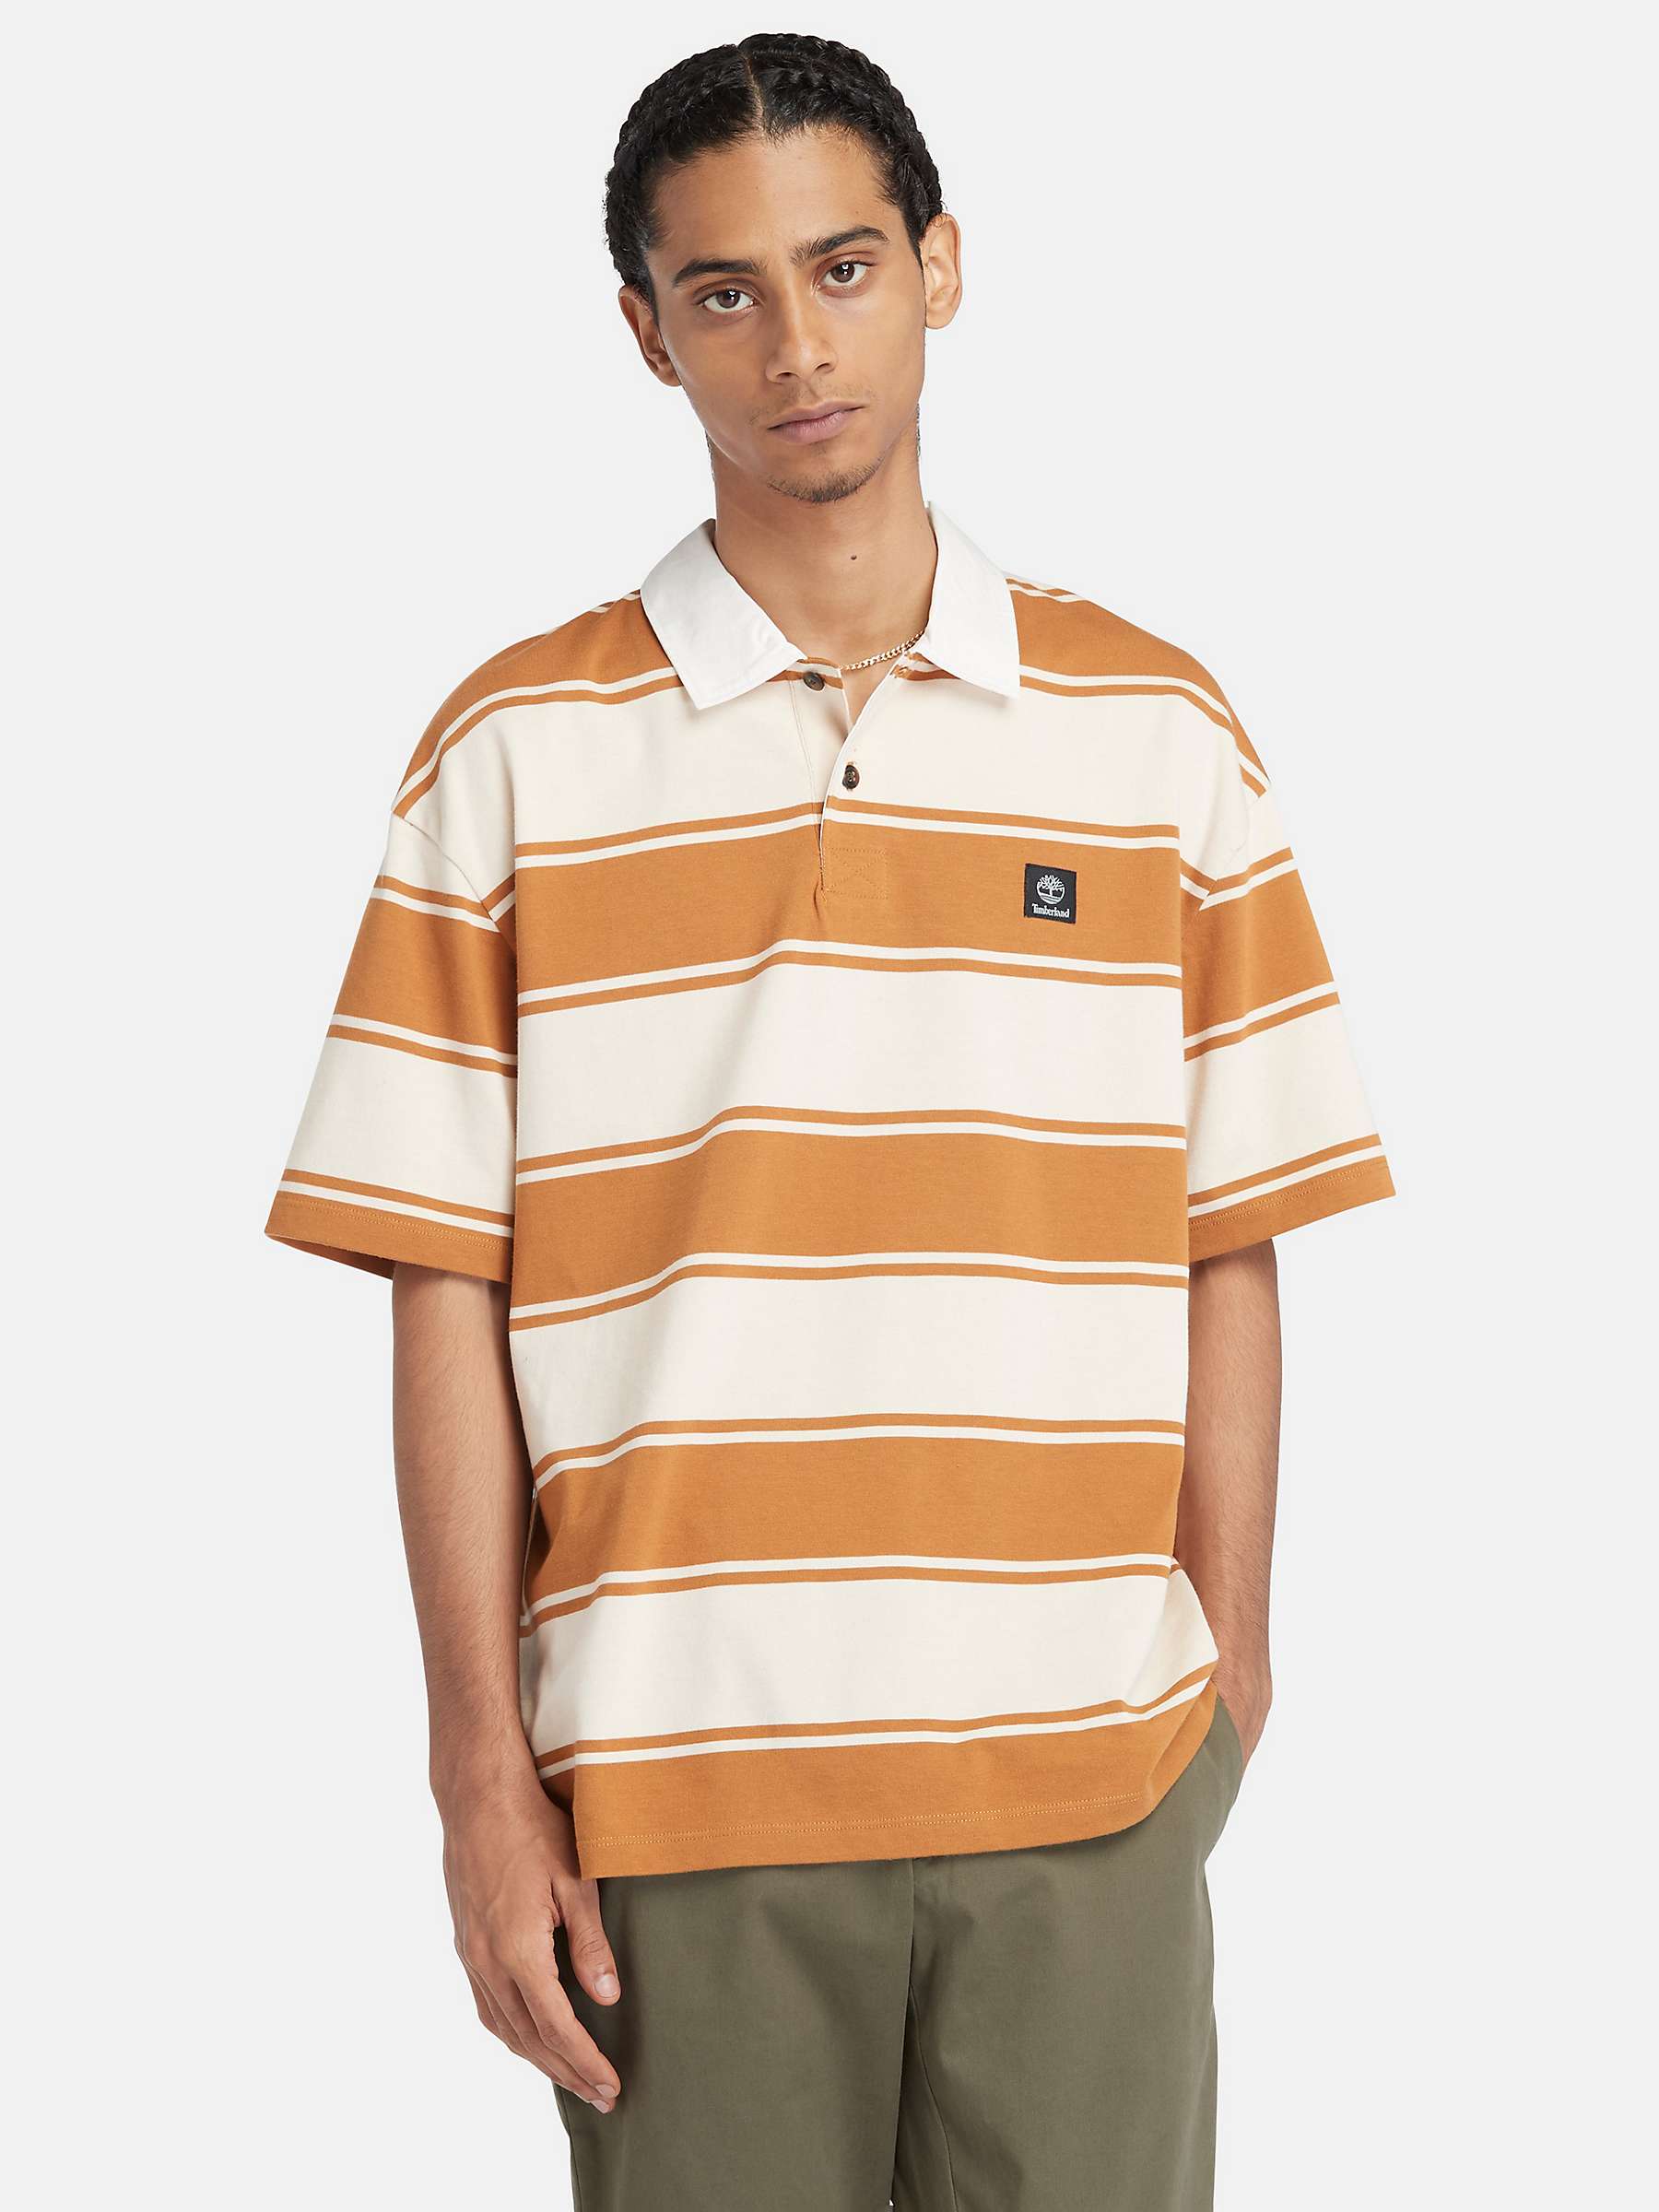 Buy Timberland Stripe Short Sleeve Rugby Shirt, Wheat/Multi Online at johnlewis.com